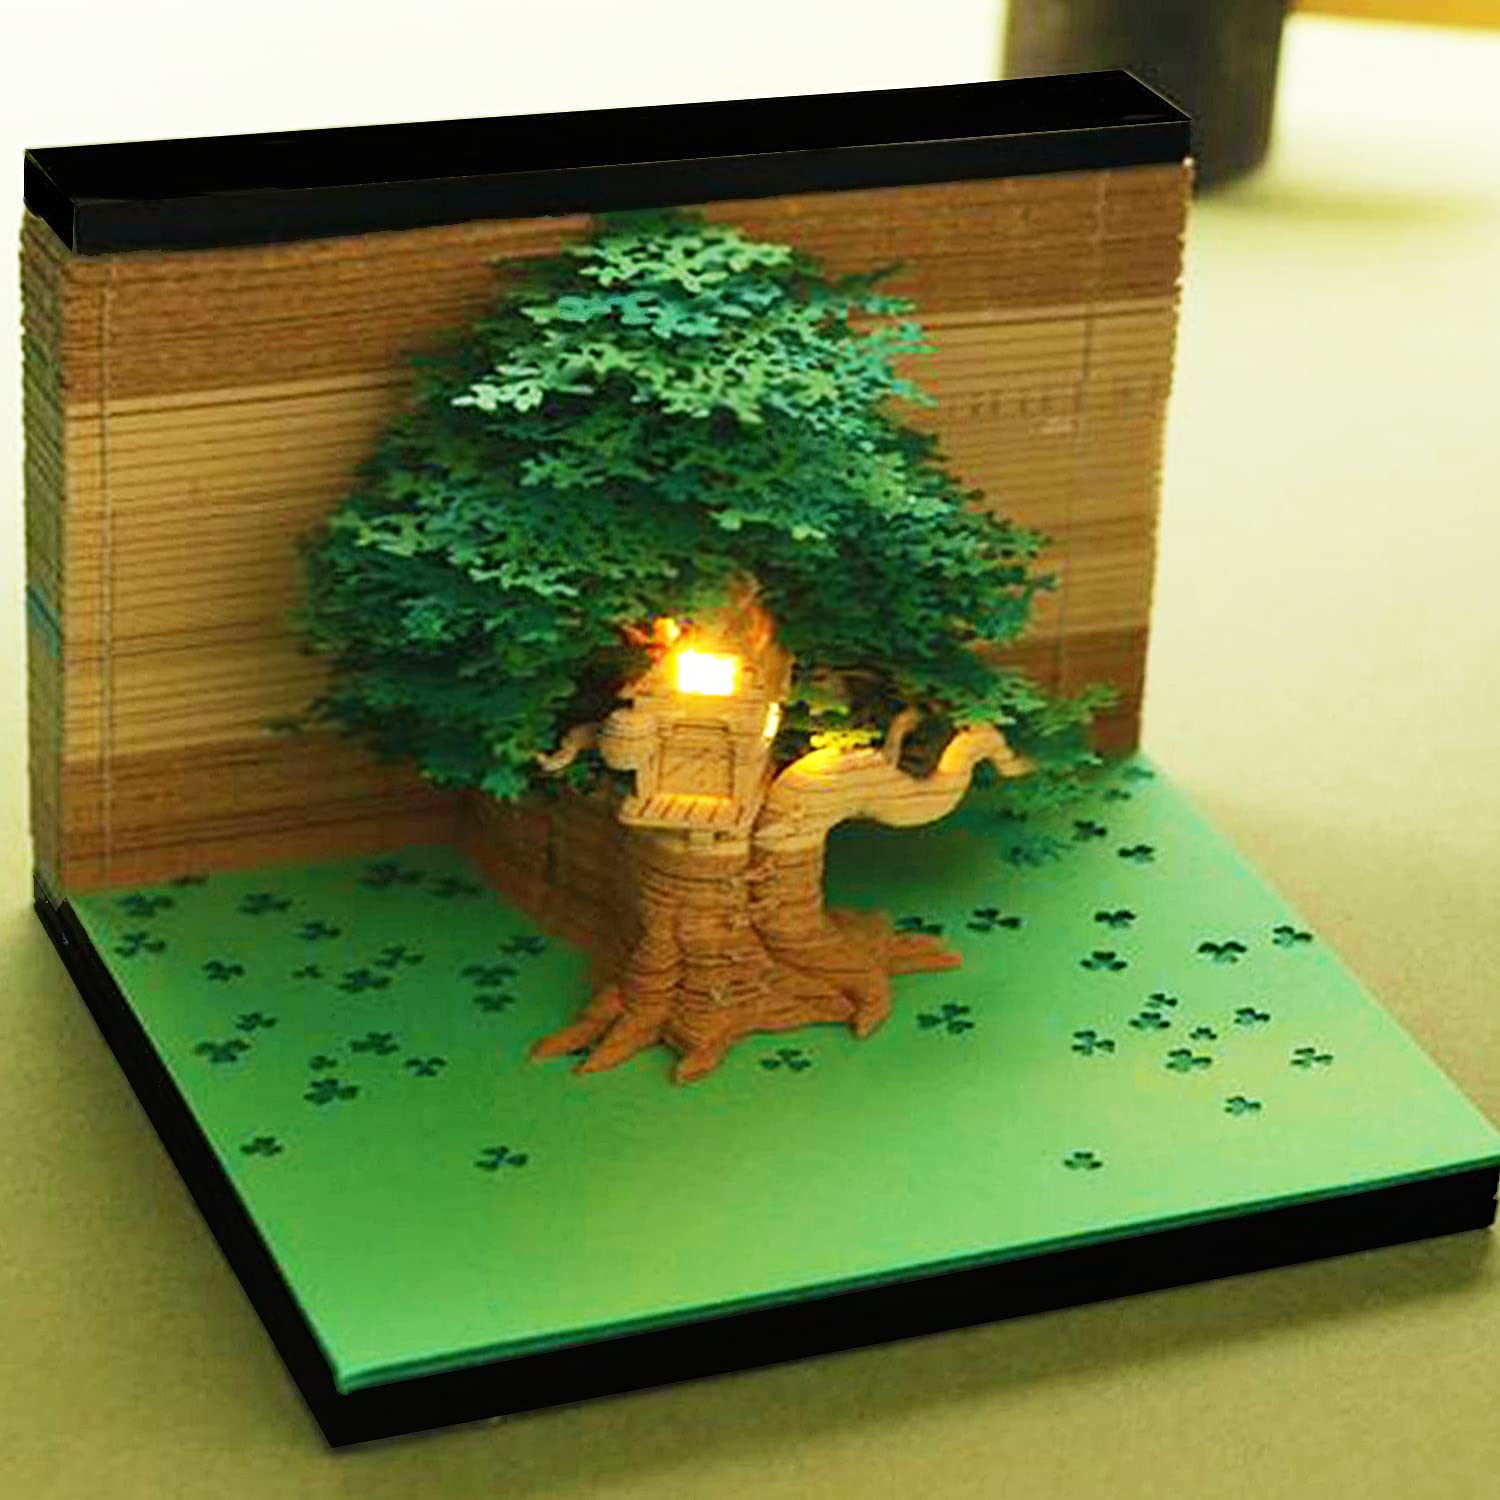 Cherry Blossom Fantasy - 3D Memo Pad with Led Light(Green)-BOOK NOOK WORLD